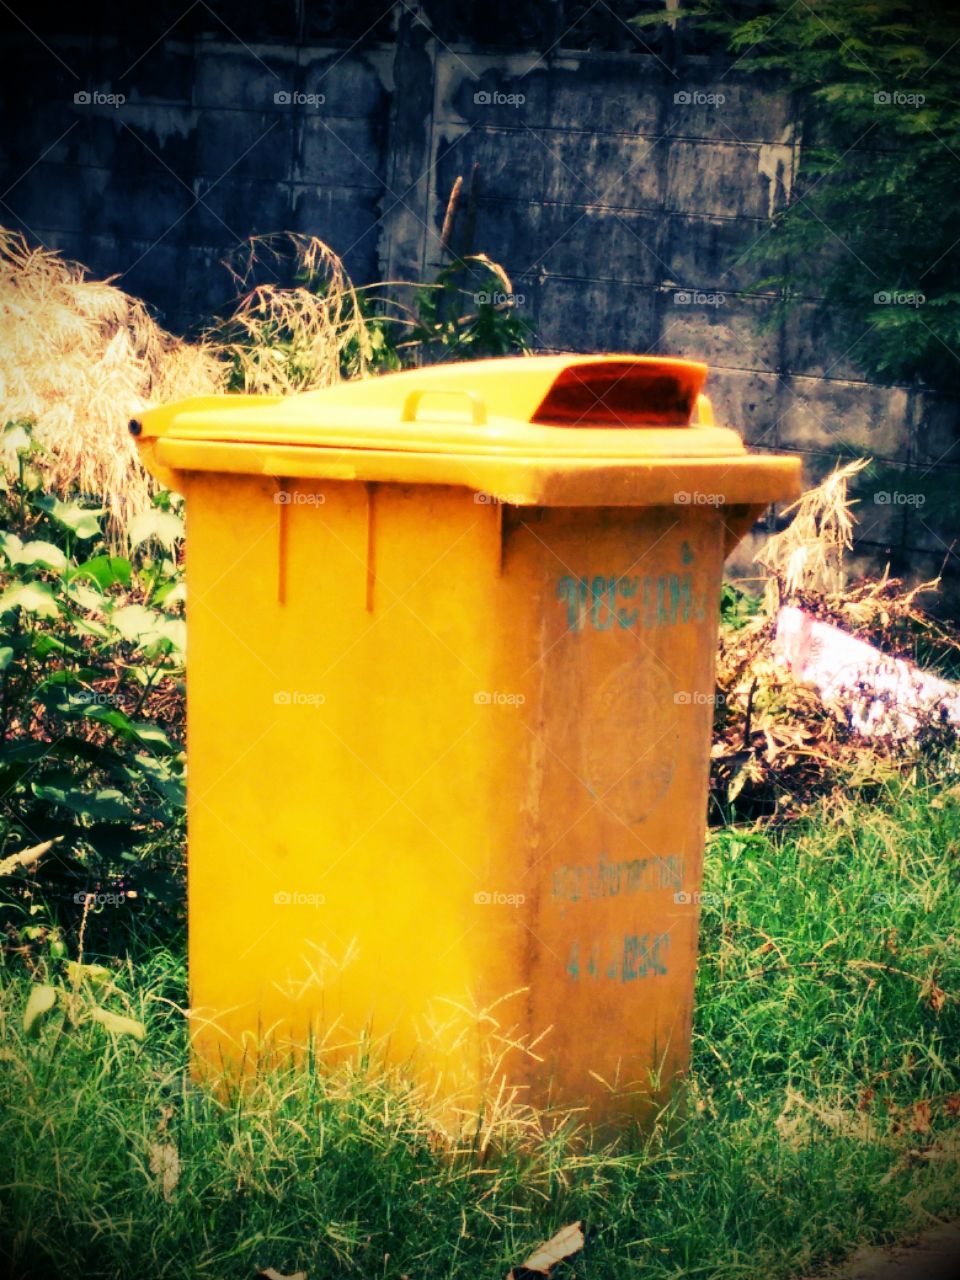 The Trashcan. The trashcan in yellow colour